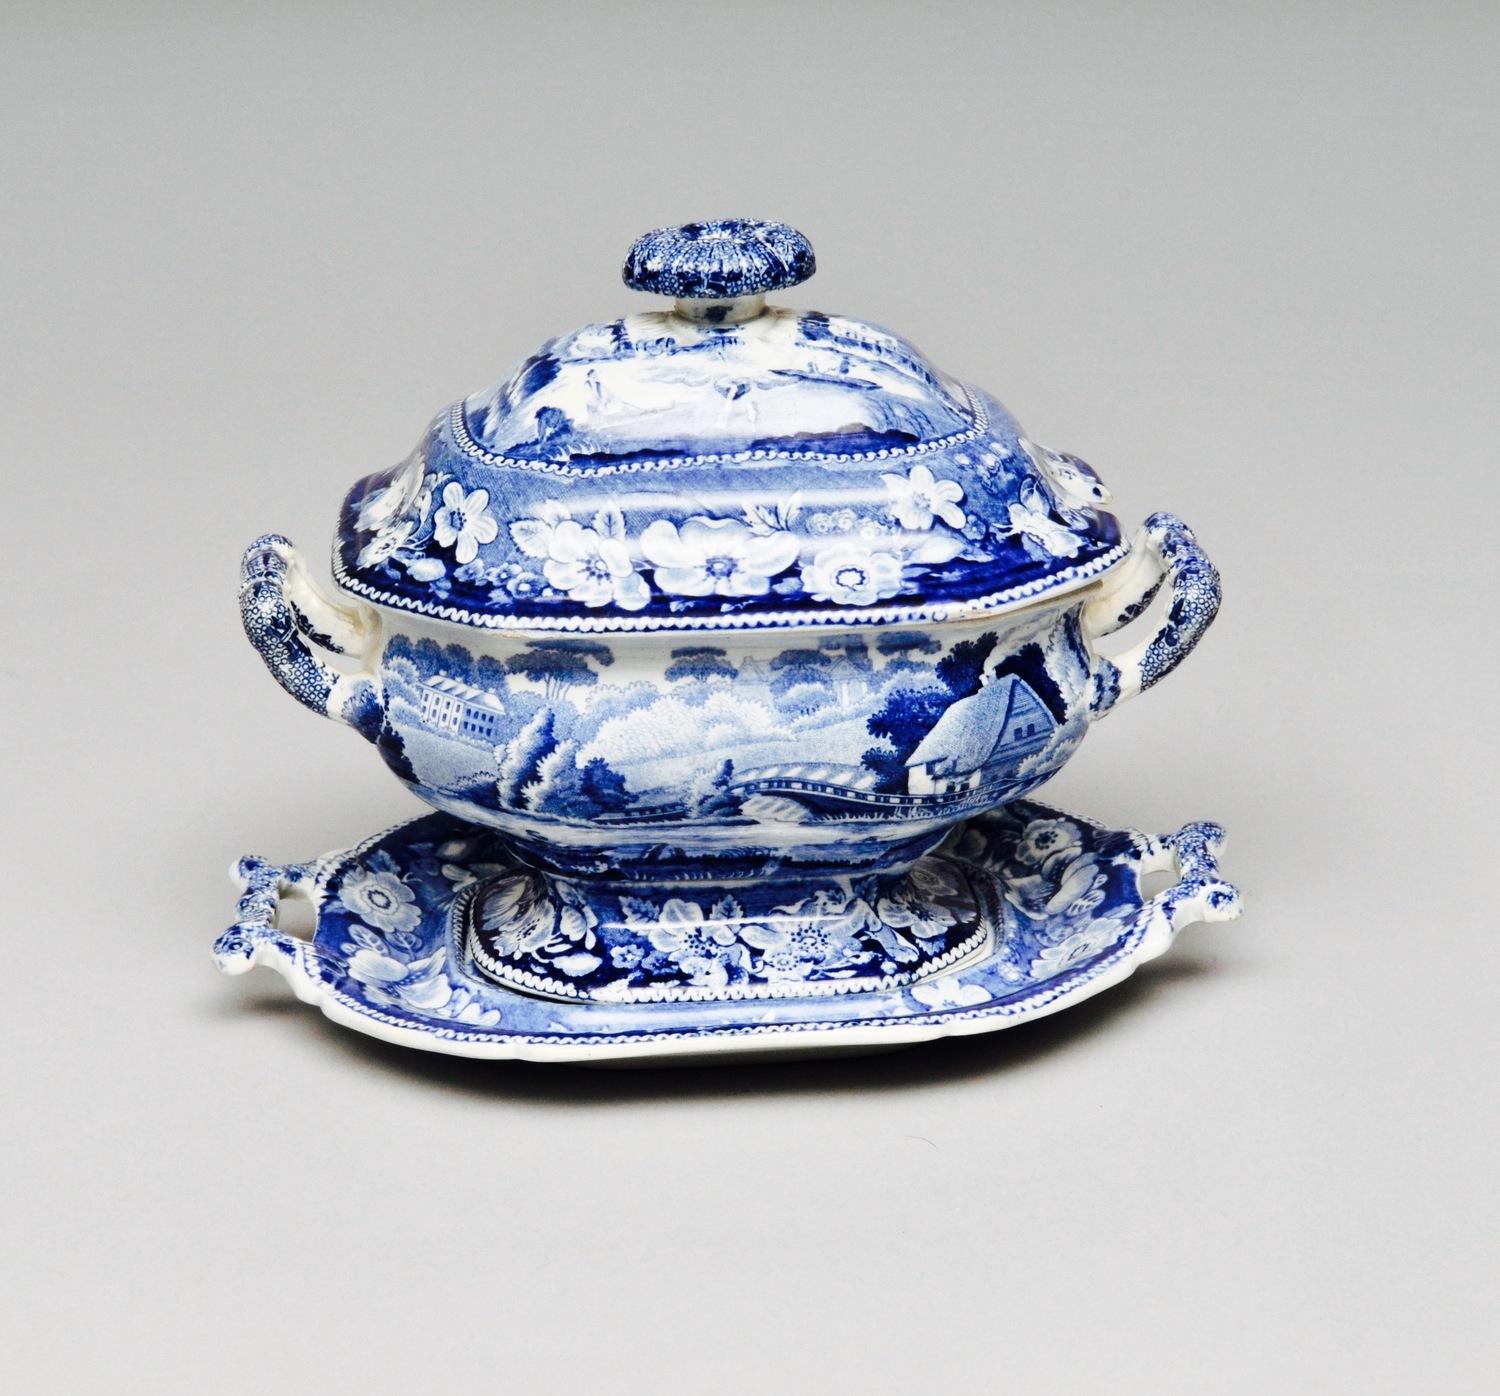 British Blue and White Antique Tureen on Its Stand with Lid